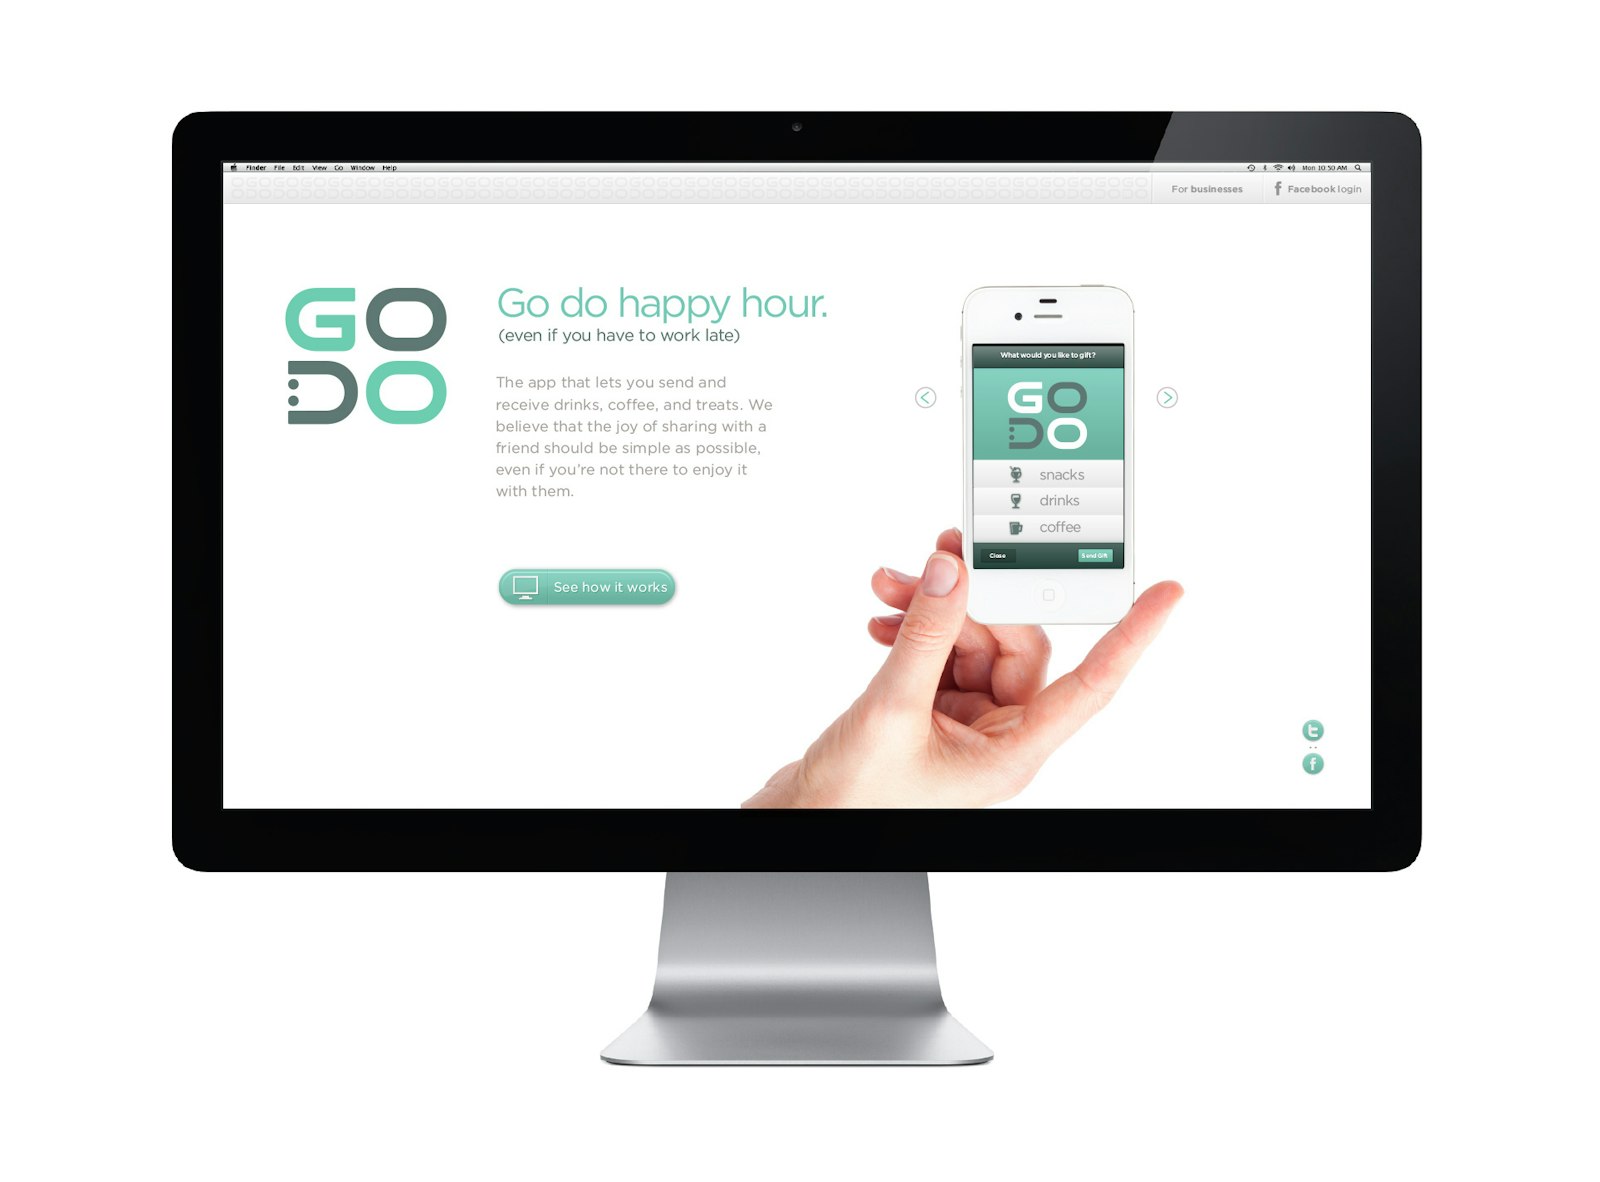 Computer monitor with website design, logo and messaging for GoDo brand.